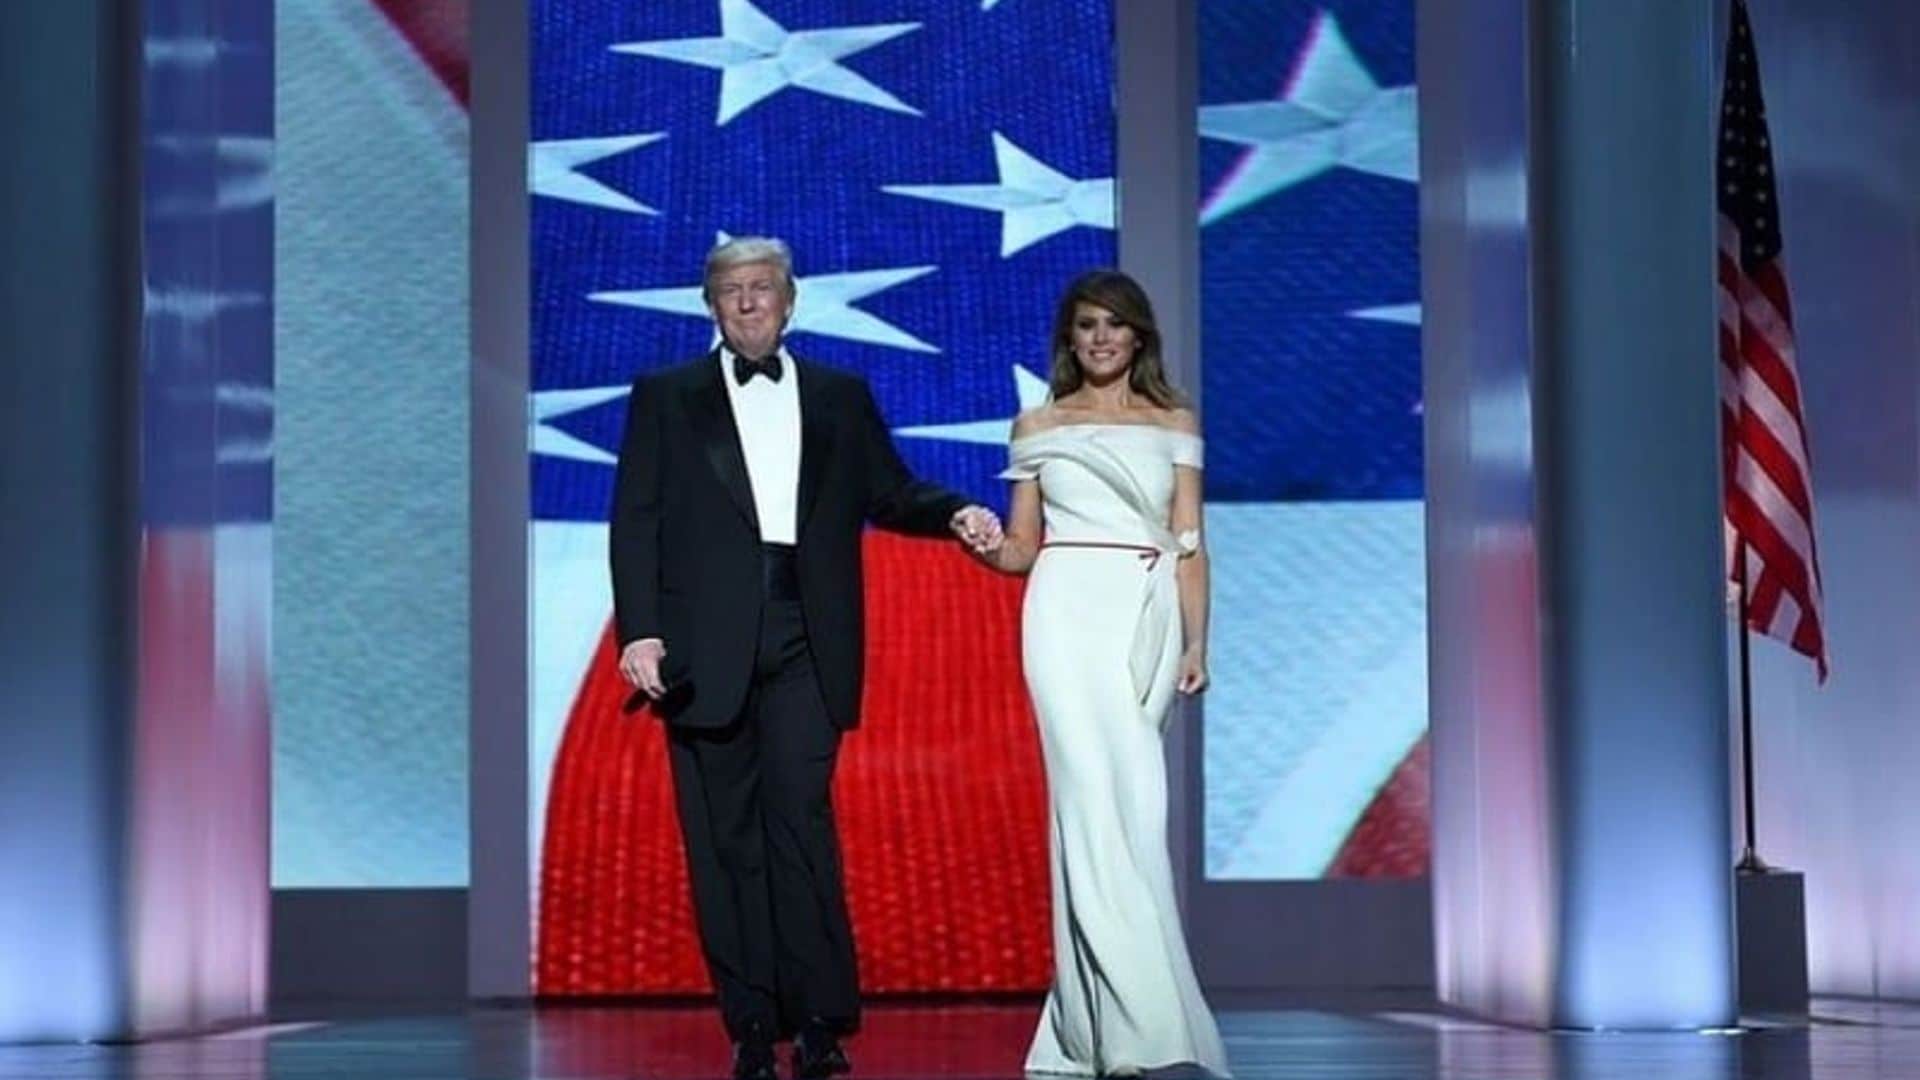 Melania stunning in a white off-the-shoulder gown for the inaugural balls.
Photo: Getty Images